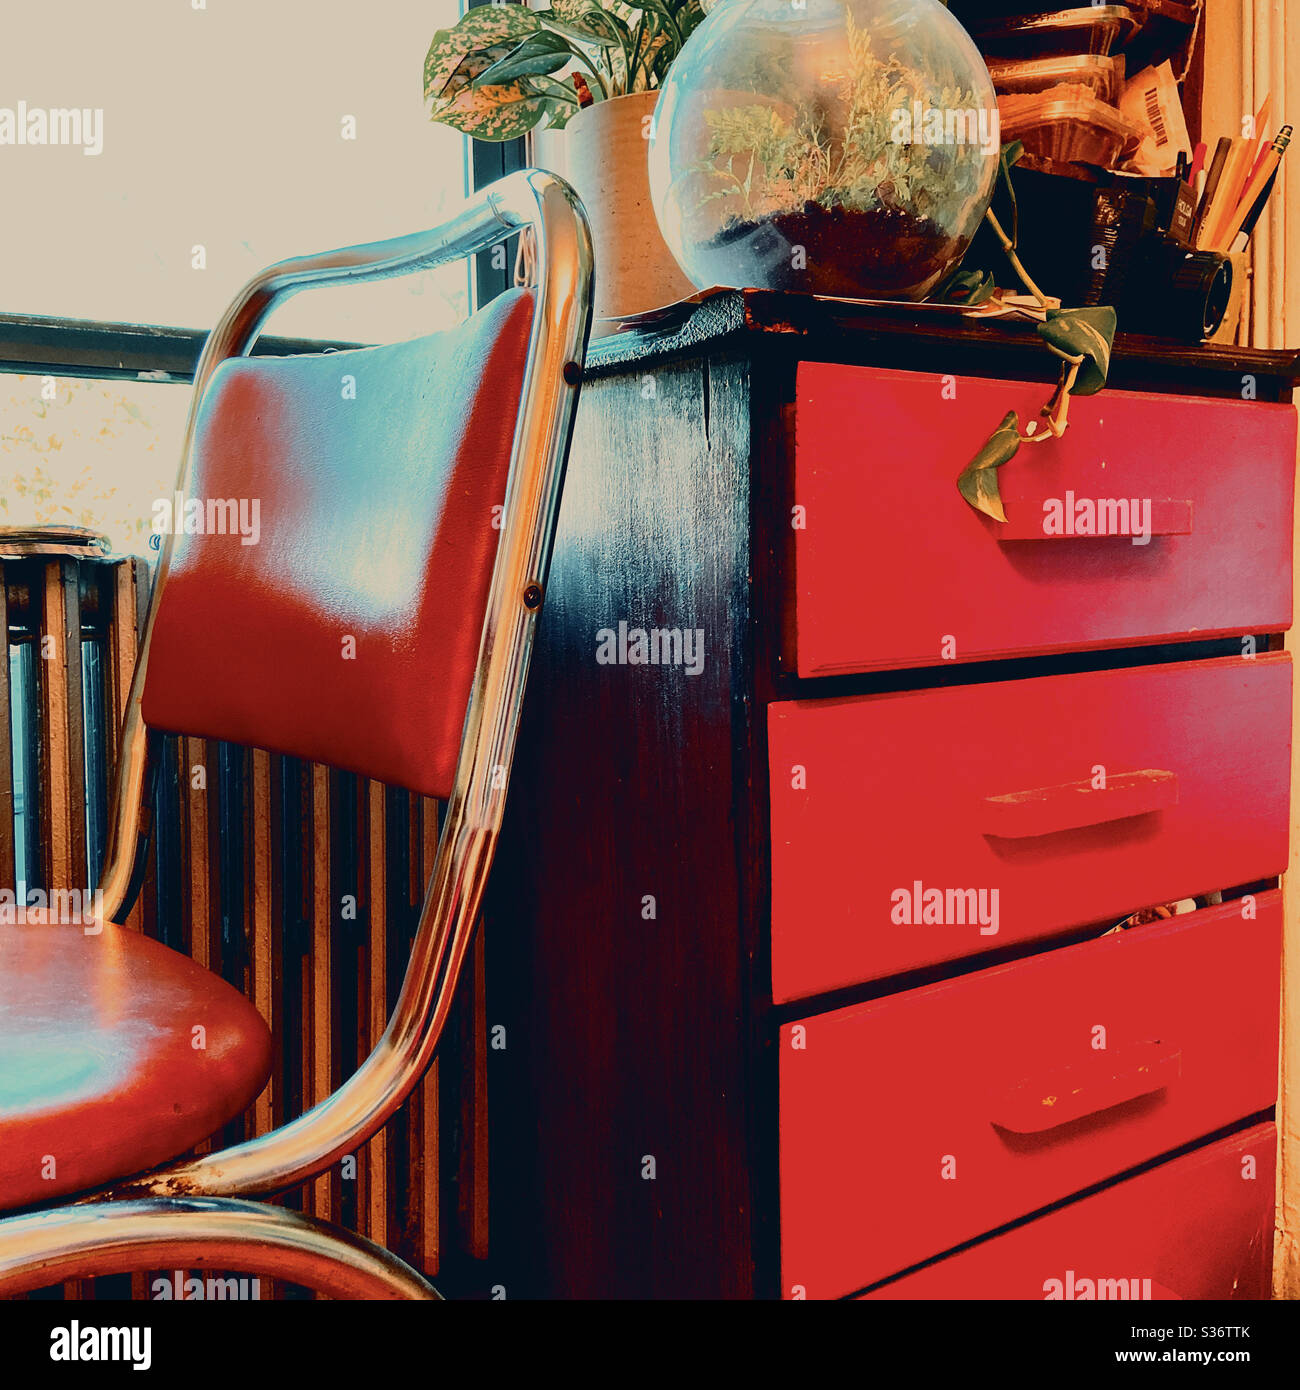 A red chair next to a red chest of drawers with plants Stock Photo